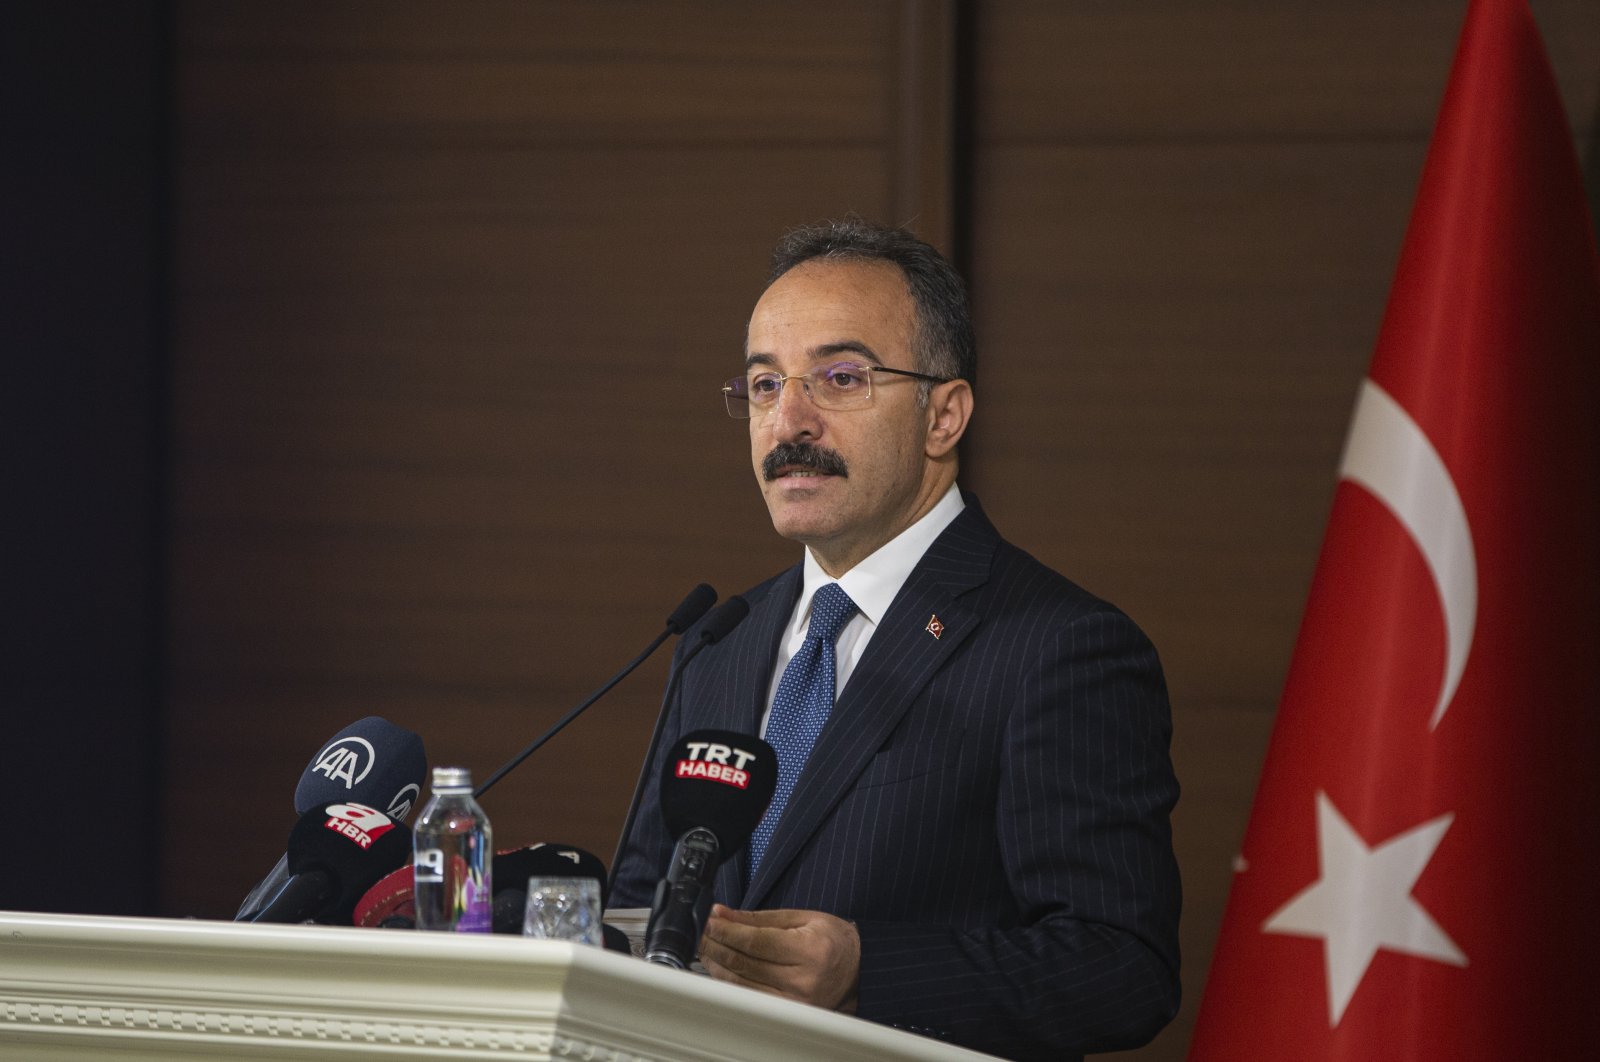 Deputy Minister of Interior Ismail Çataklı speaking at a "Monthly Press Information Meeting" covering the activities of the ministry, Ankara, Türkiye, Oct. 5, 2022. (AA Photo)